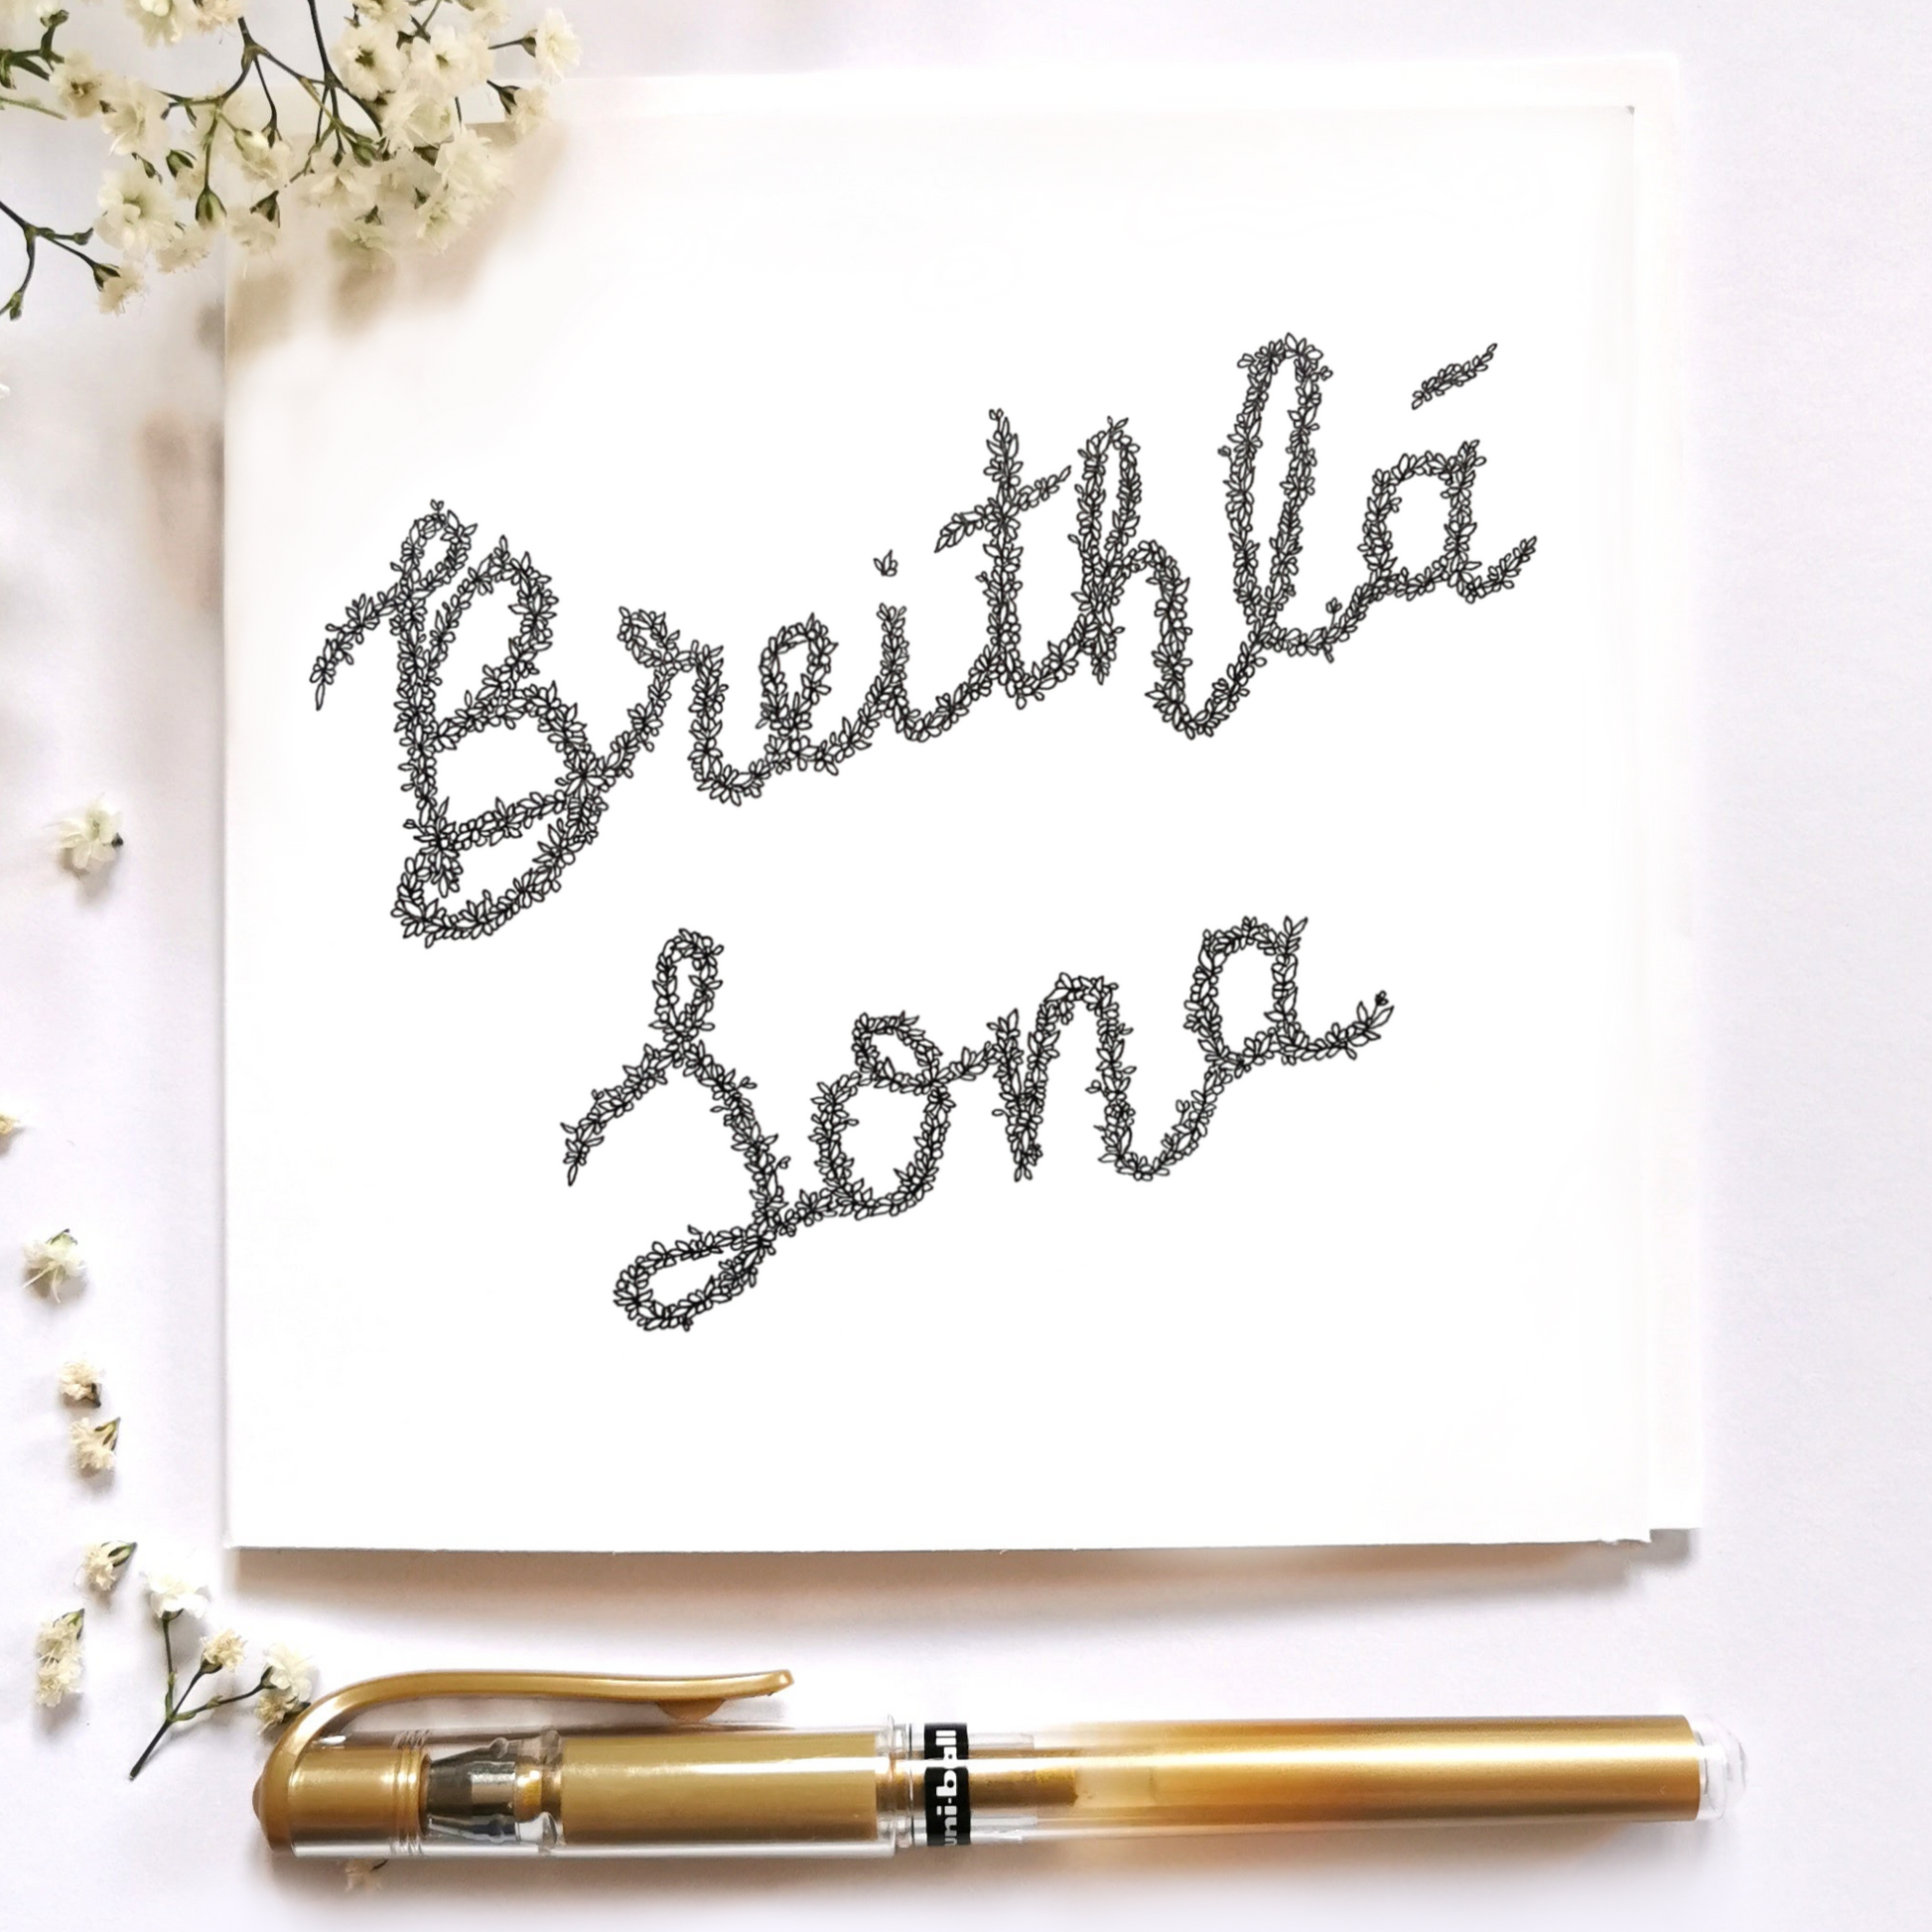 Image shows illustration of an Irish saying ' Breith Lá Sona' meaning Happy Birthday. Illustrations is drawn in joint writing and made entirely of black and white flowers. Image is dressed up with a gold pen and white floral arrangement surrounding the illustraton to display what image could look like in portrait.